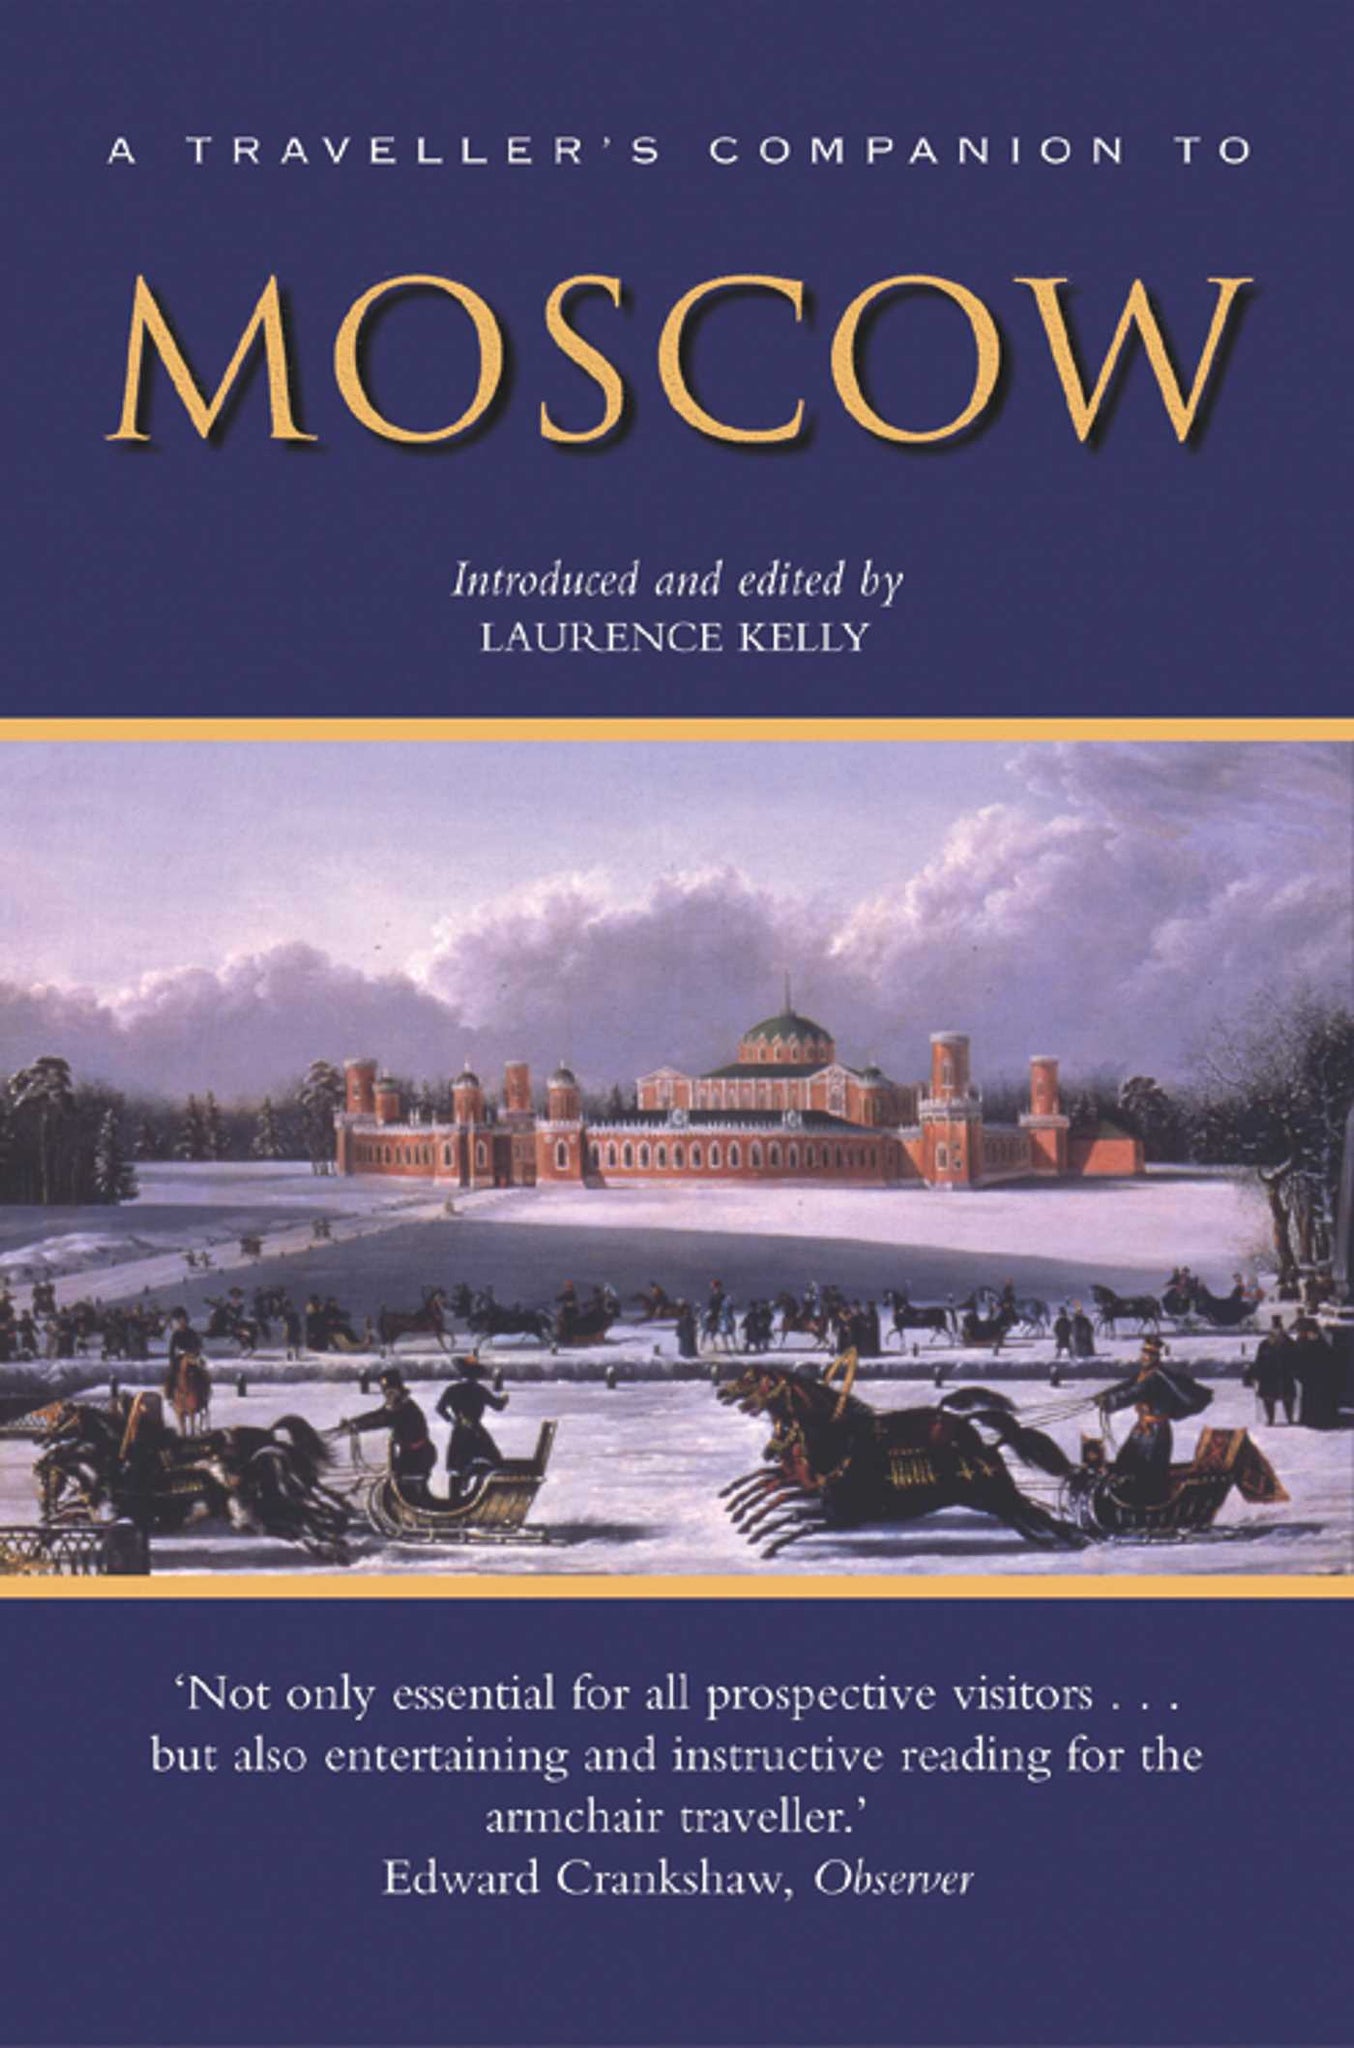 A Traveller's Companion to Moscow